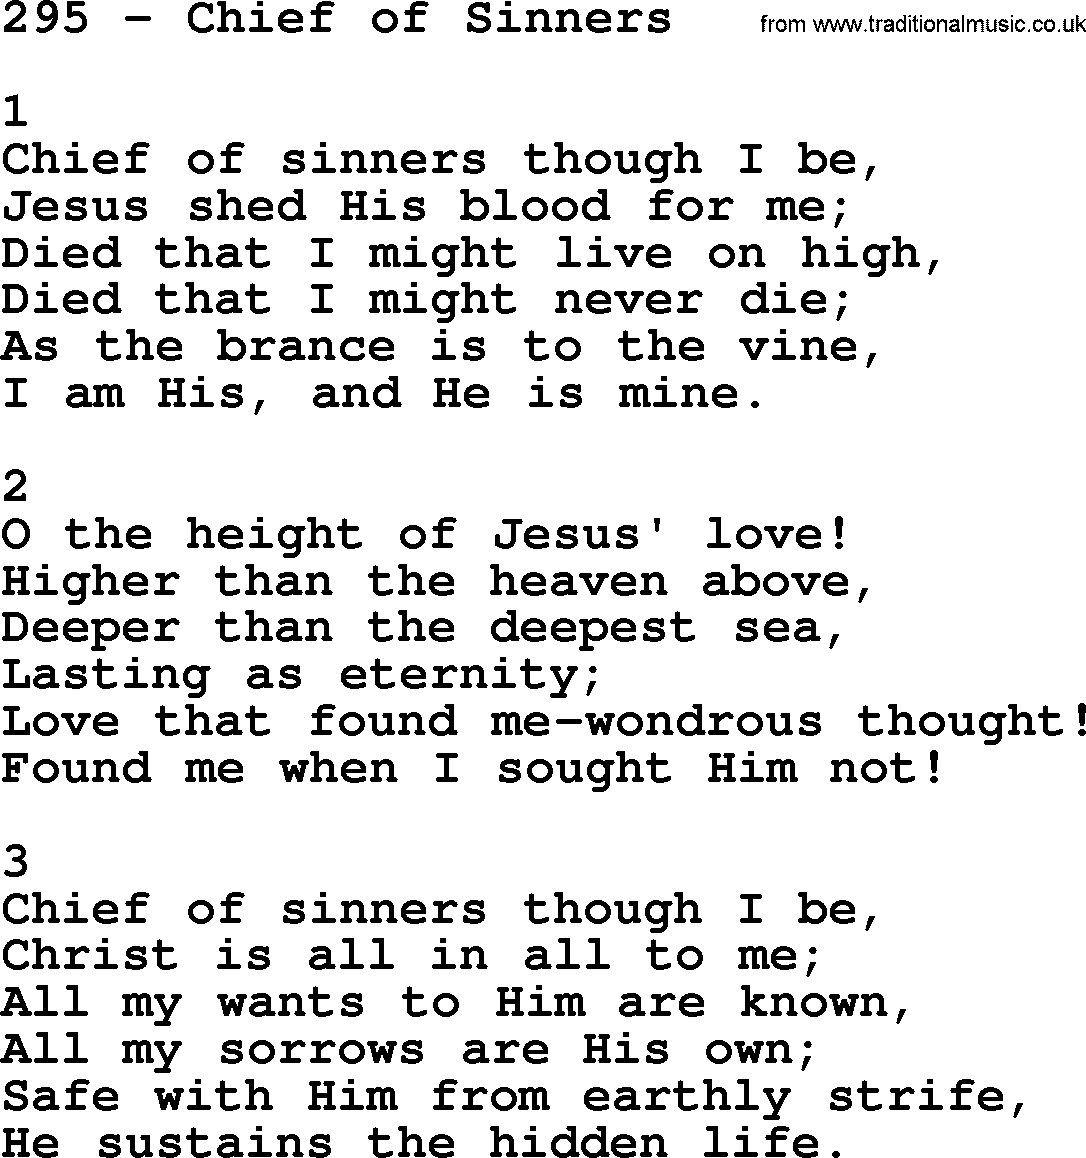 Complete Adventis Hymnal, title: 295-Chief Of Sinners, with lyrics, midi, mp3, powerpoints(PPT) and PDF,